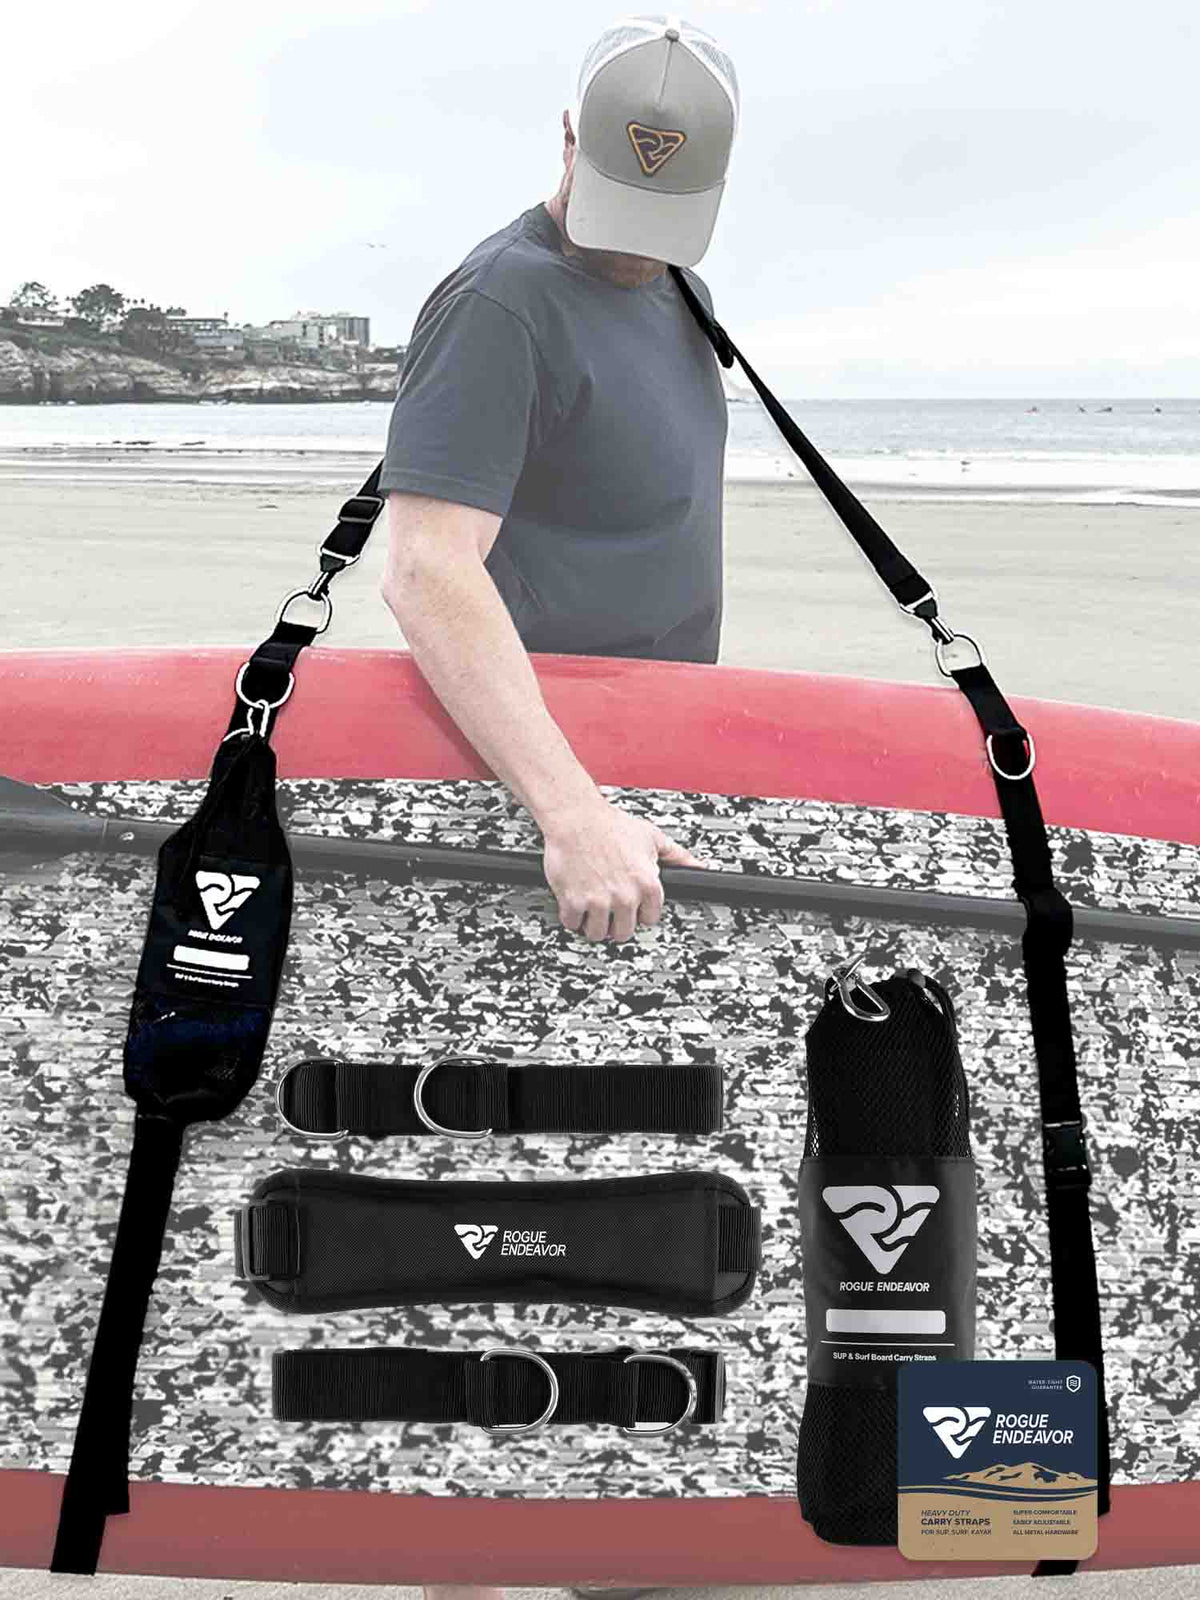 Stand Up Paddle Board Carry Straps – RogueEndeavor